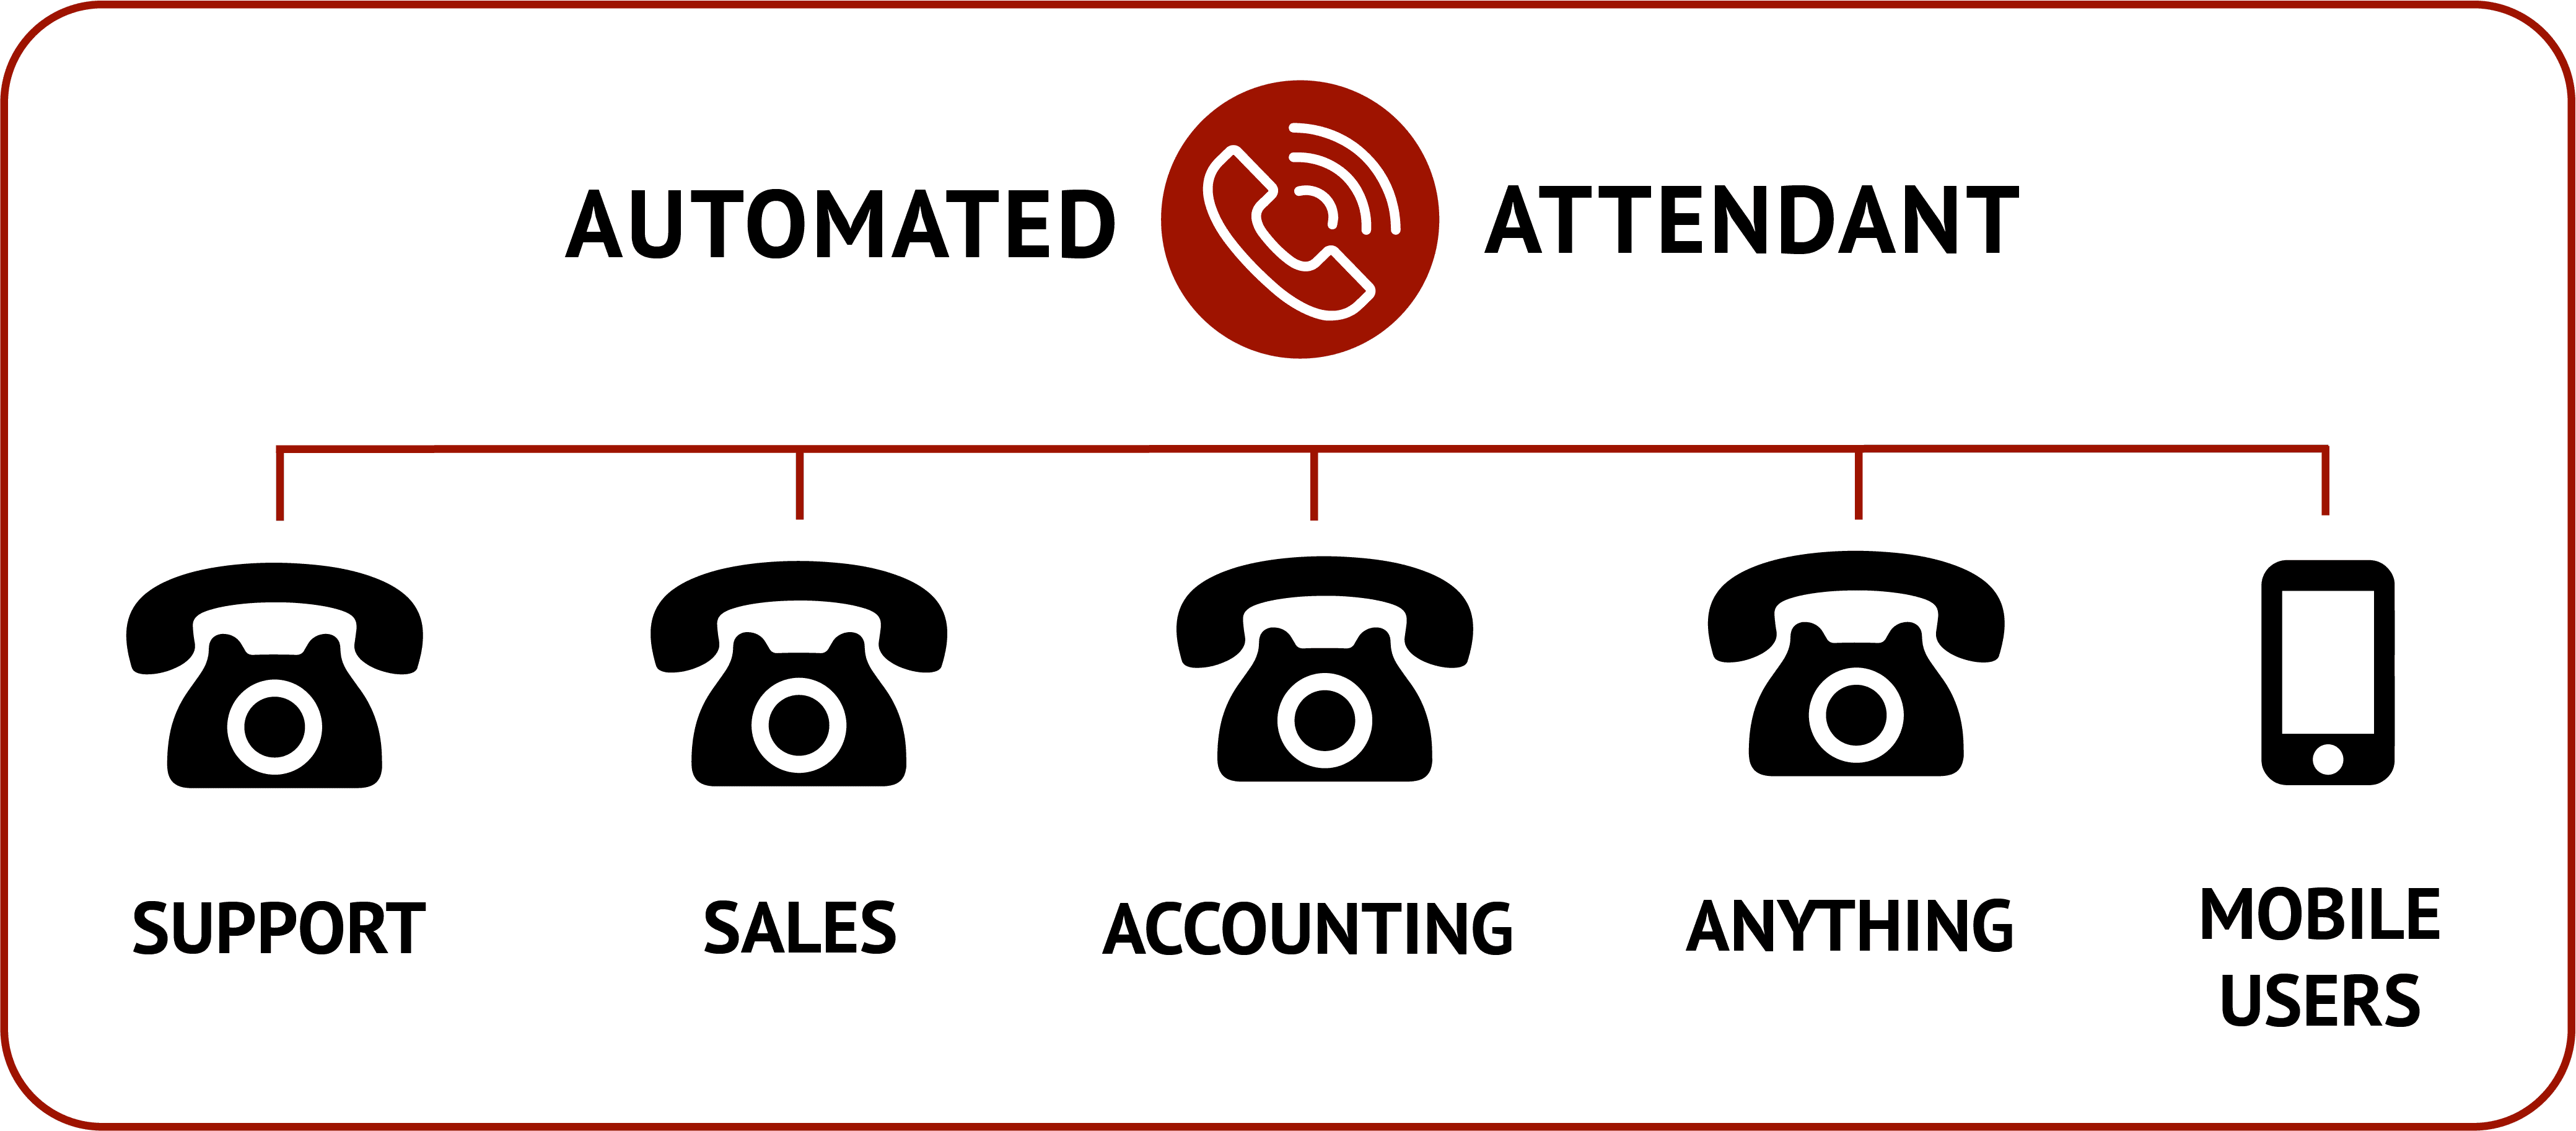 Automated attendant graphic for voip apps and services